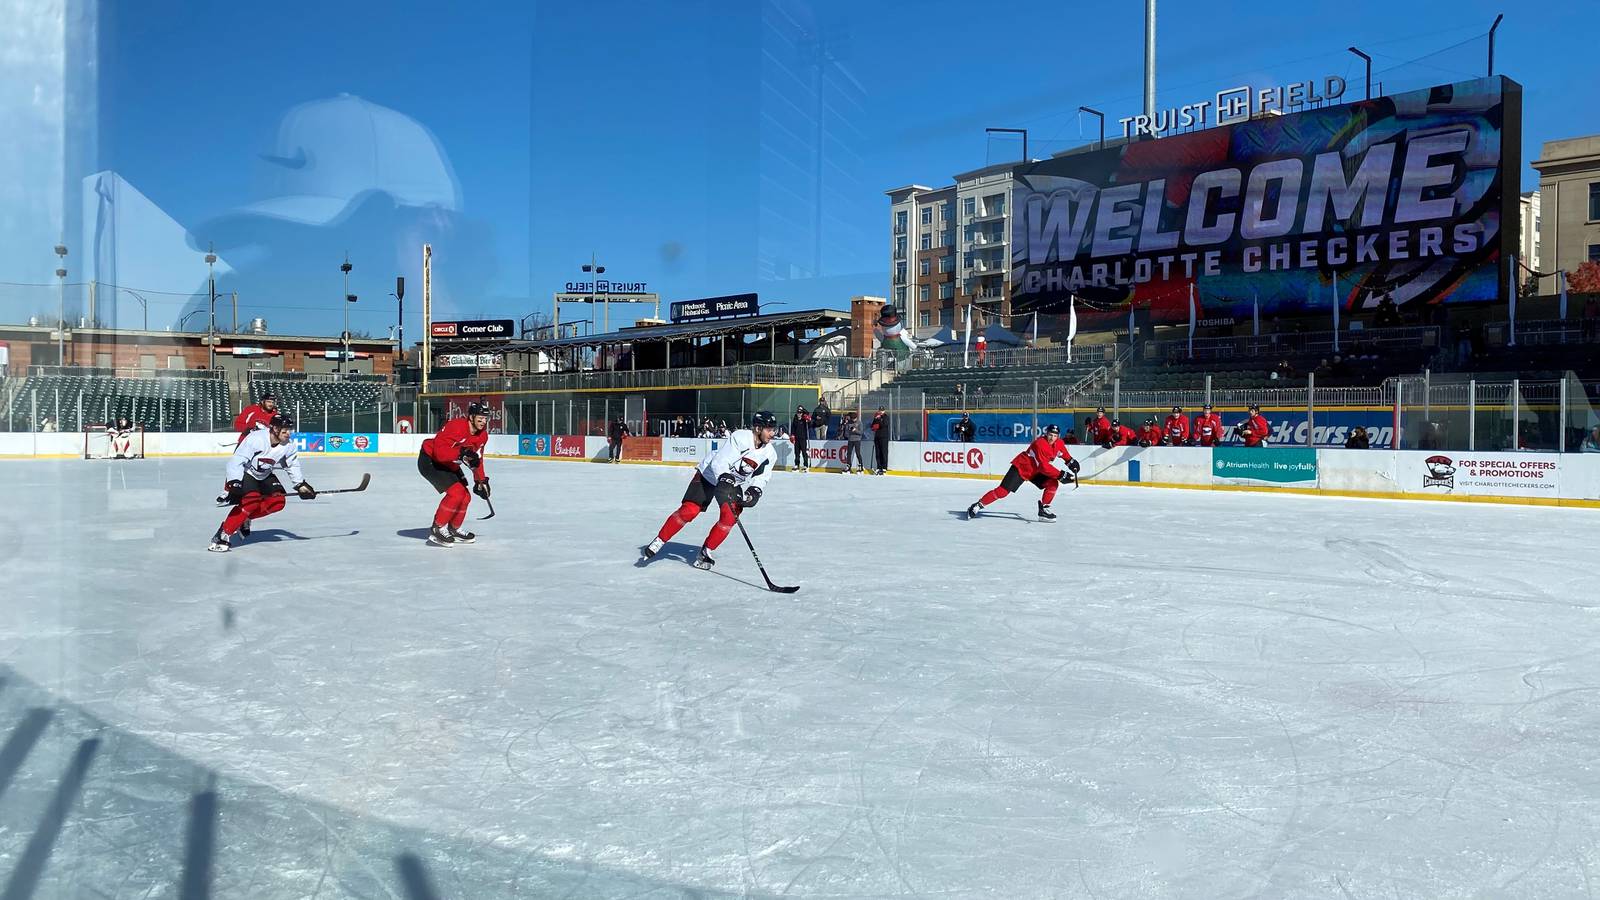 Charlotte Checkers to play outdoor game at Truist Field in 2024 WSOC TV